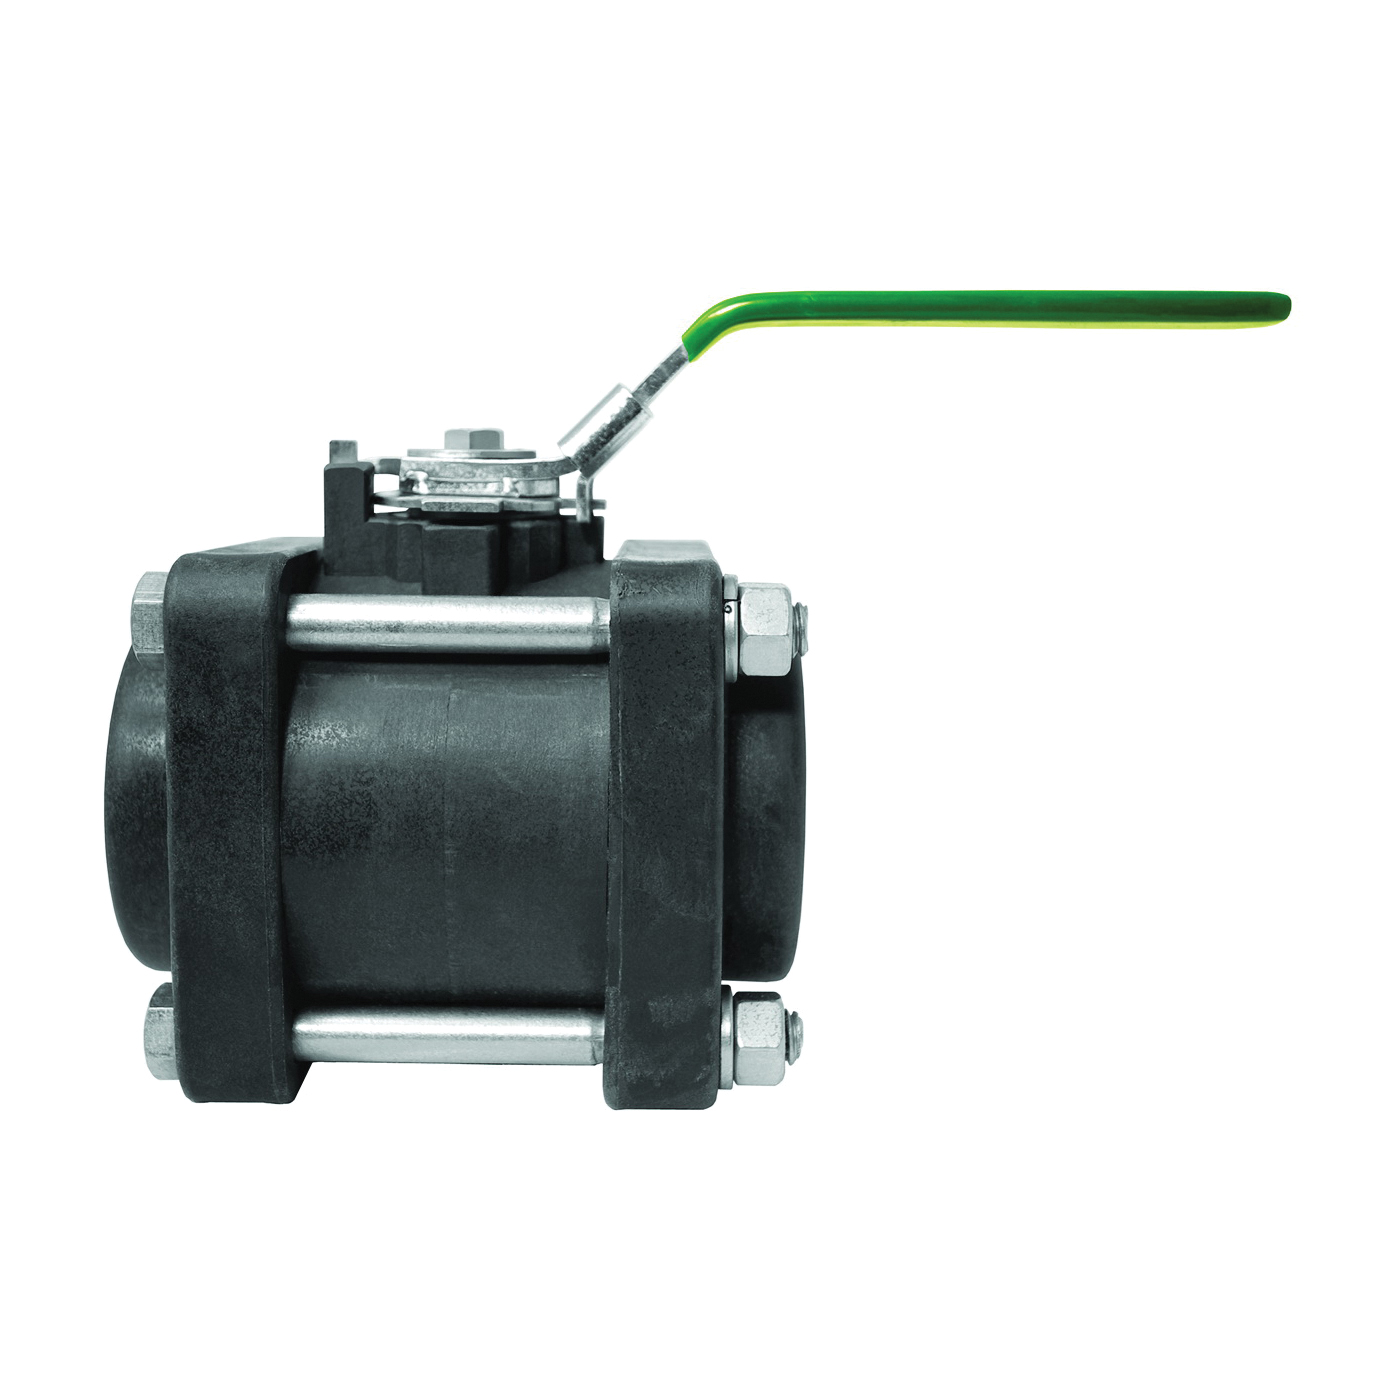 V075FP/VX075FP Ball Valve, 3/4 in Connection, Female NPT, 150 psi Pressure, Manual Actuator